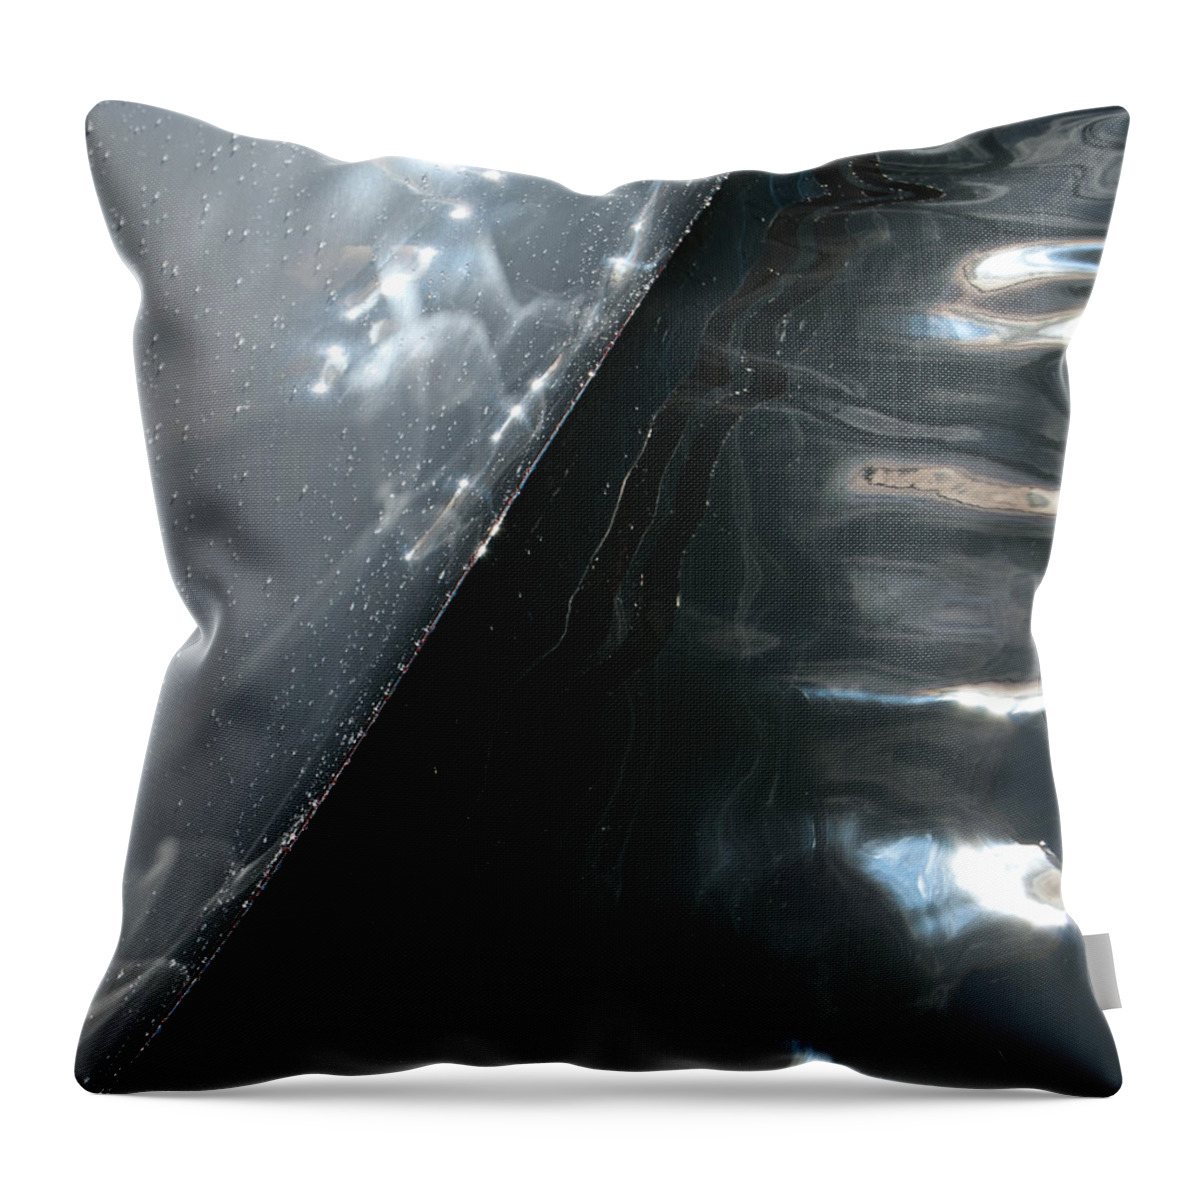 Sailboat Throw Pillow featuring the photograph Sailboat Hull - Abstract by Jani Freimann